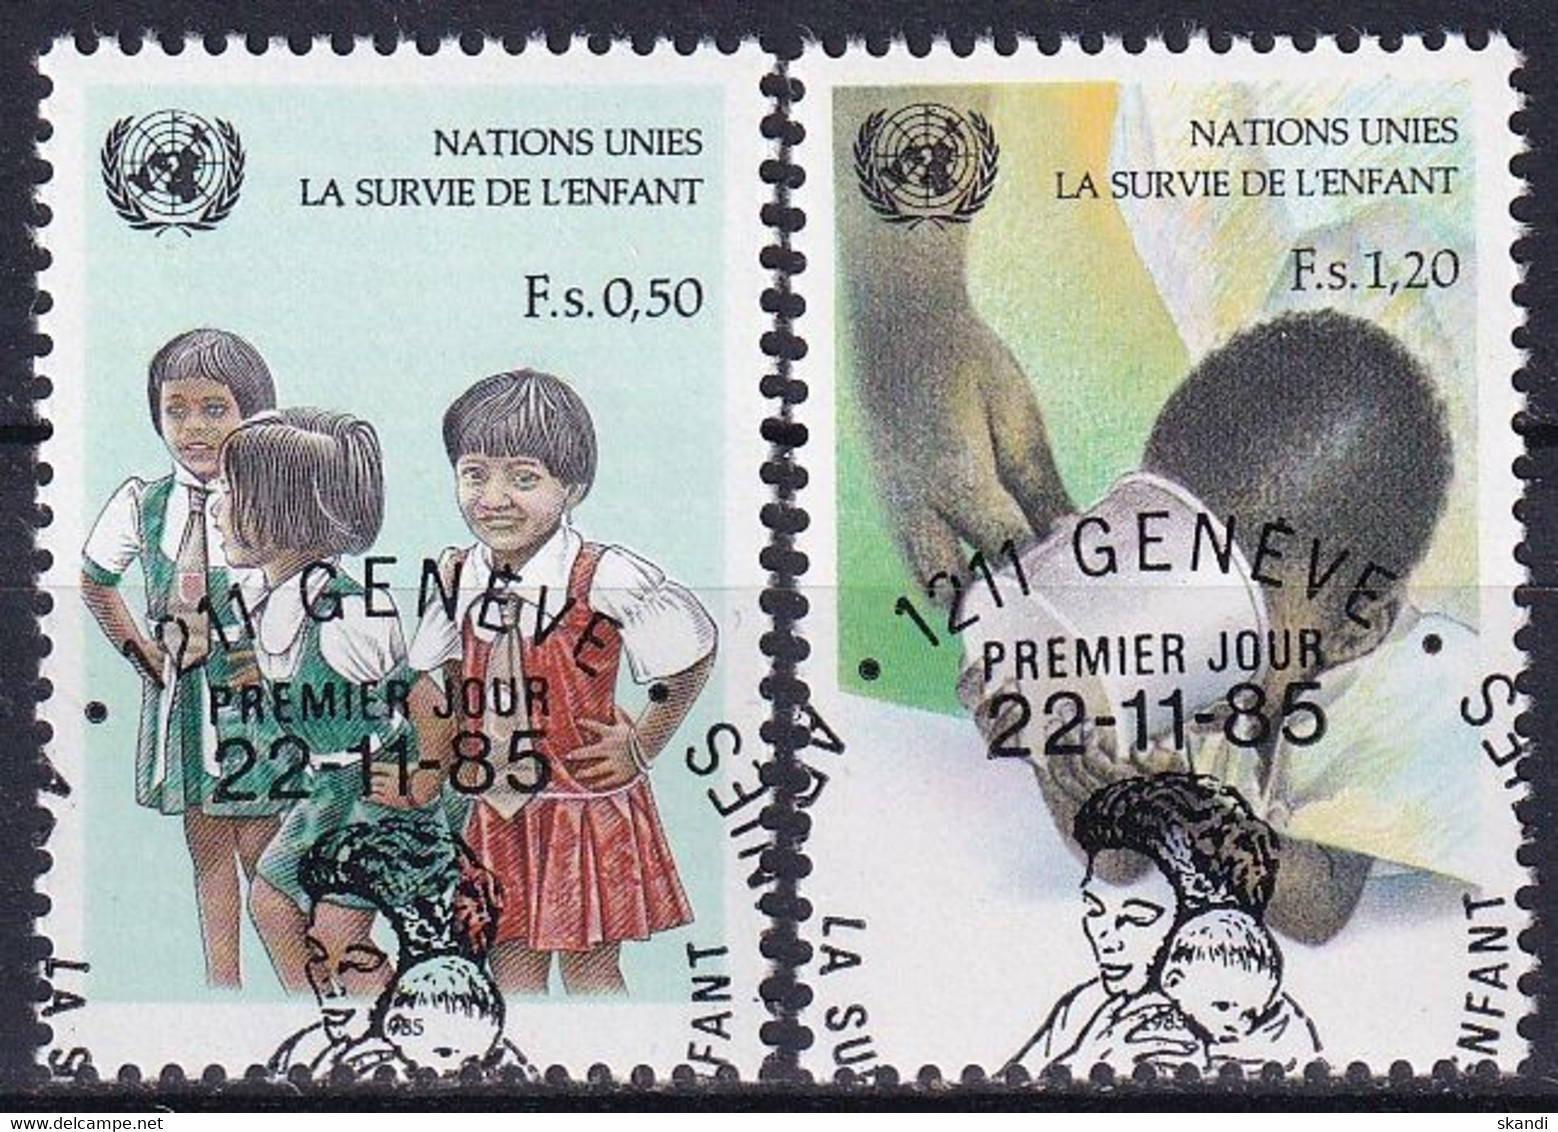 UNO GENF 1985 Mi-Nr. 135/36 O Used - Aus Abo - Used Stamps